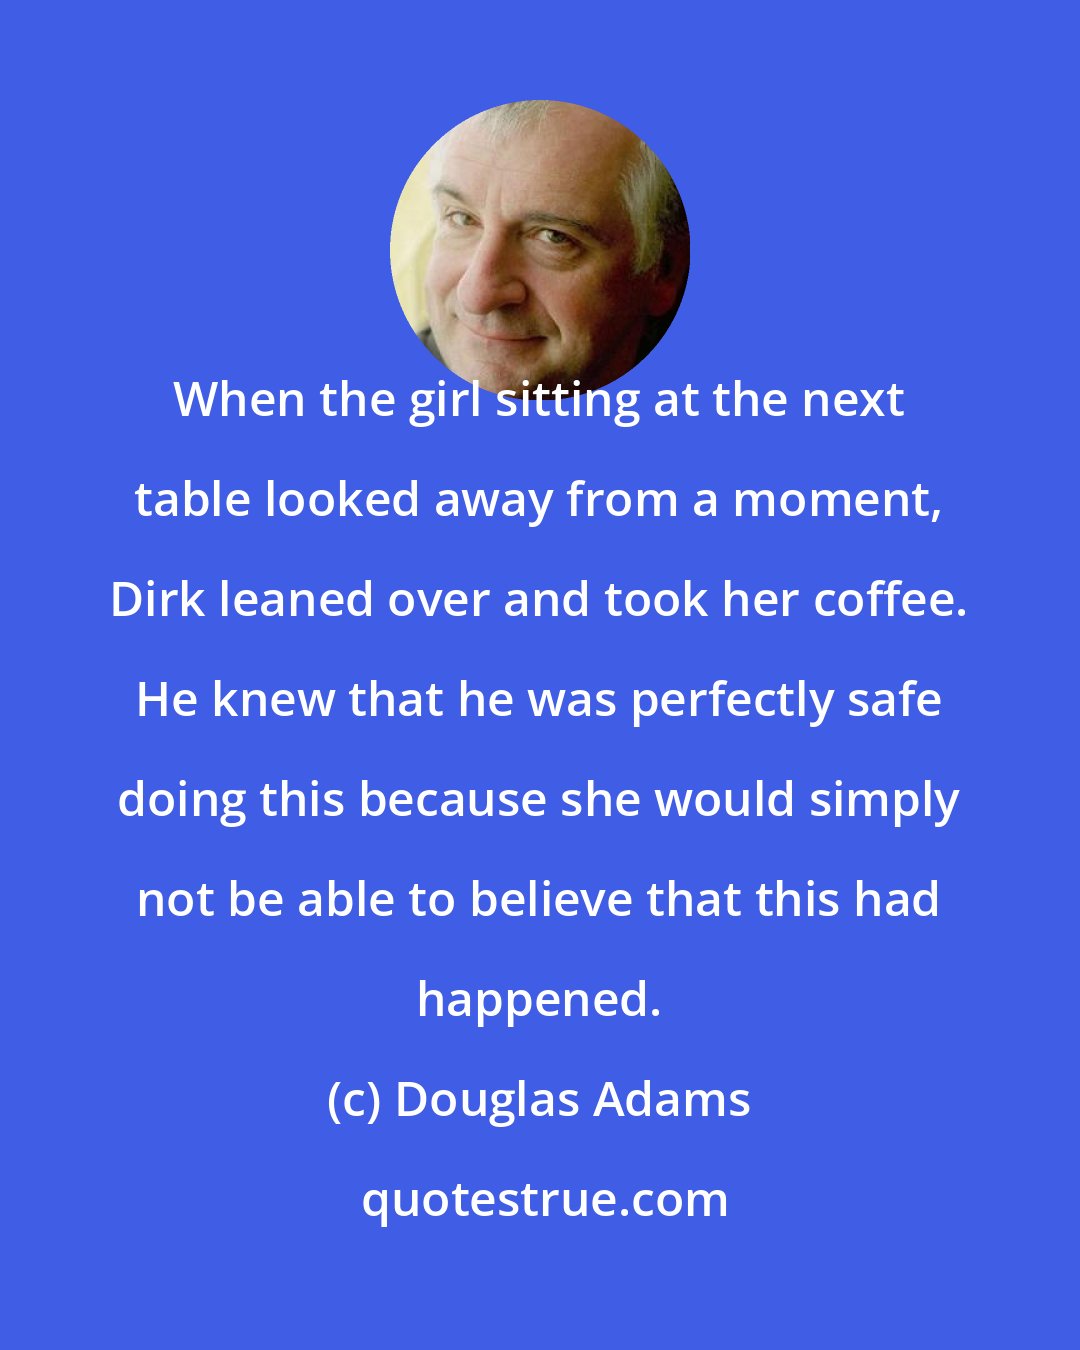 Douglas Adams: When the girl sitting at the next table looked away from a moment, Dirk leaned over and took her coffee. He knew that he was perfectly safe doing this because she would simply not be able to believe that this had happened.